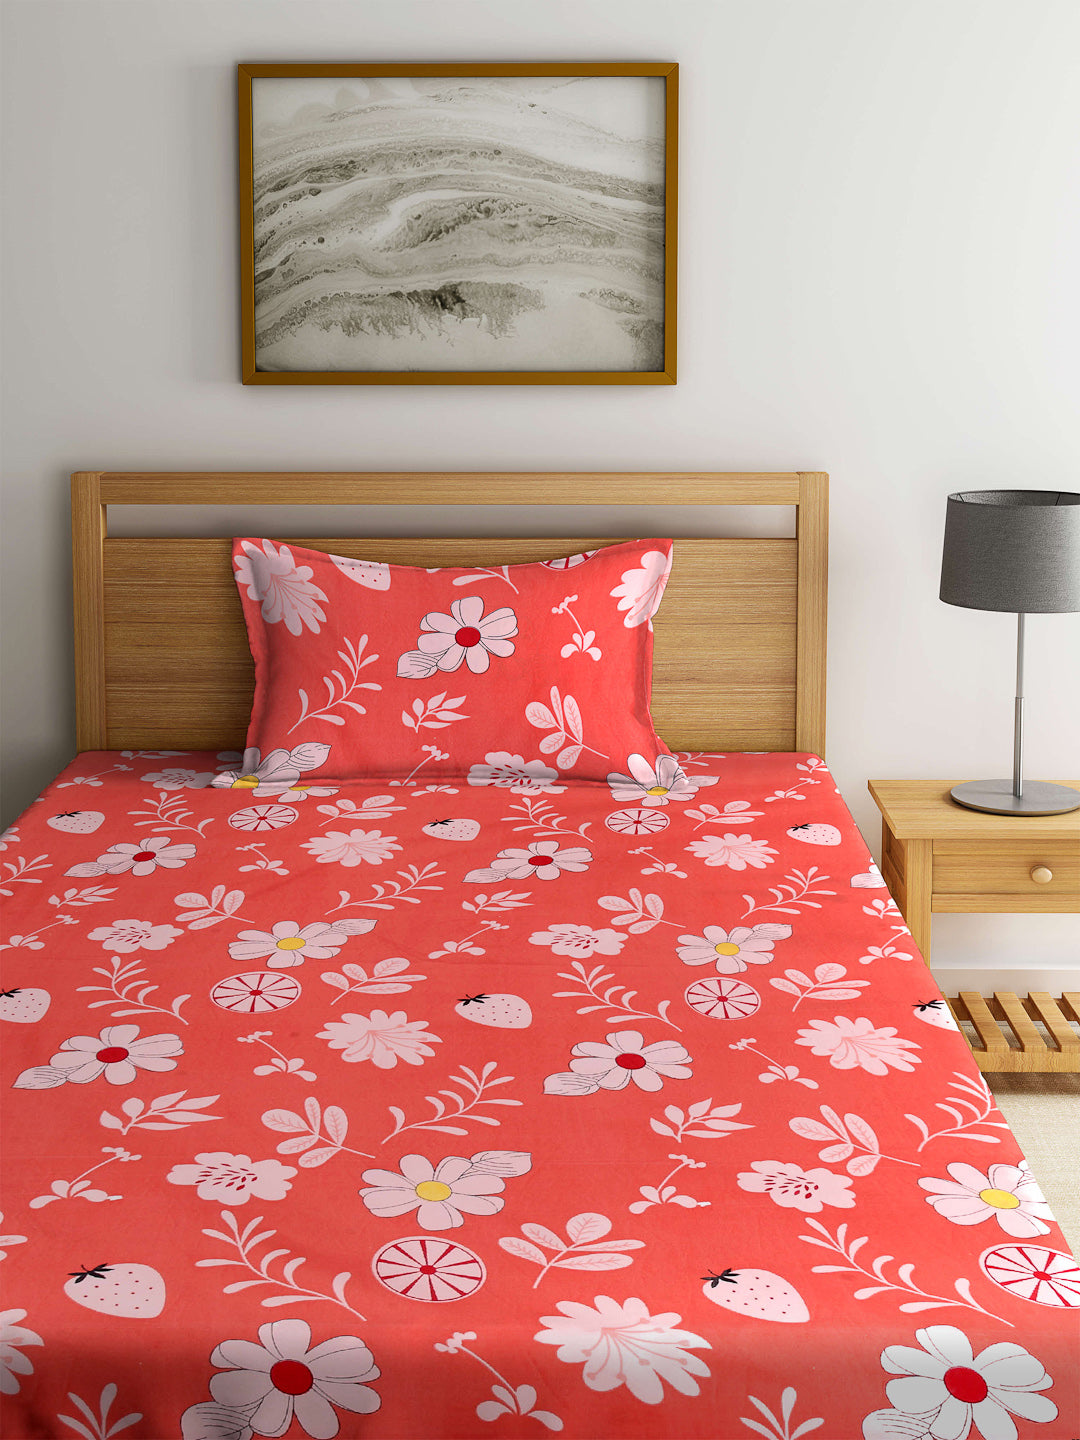 Arrabi Orange Floral TC Cotton Blend Single Size Fitted Bedsheet with 1 Pillow Cover (220 X 150 cm)